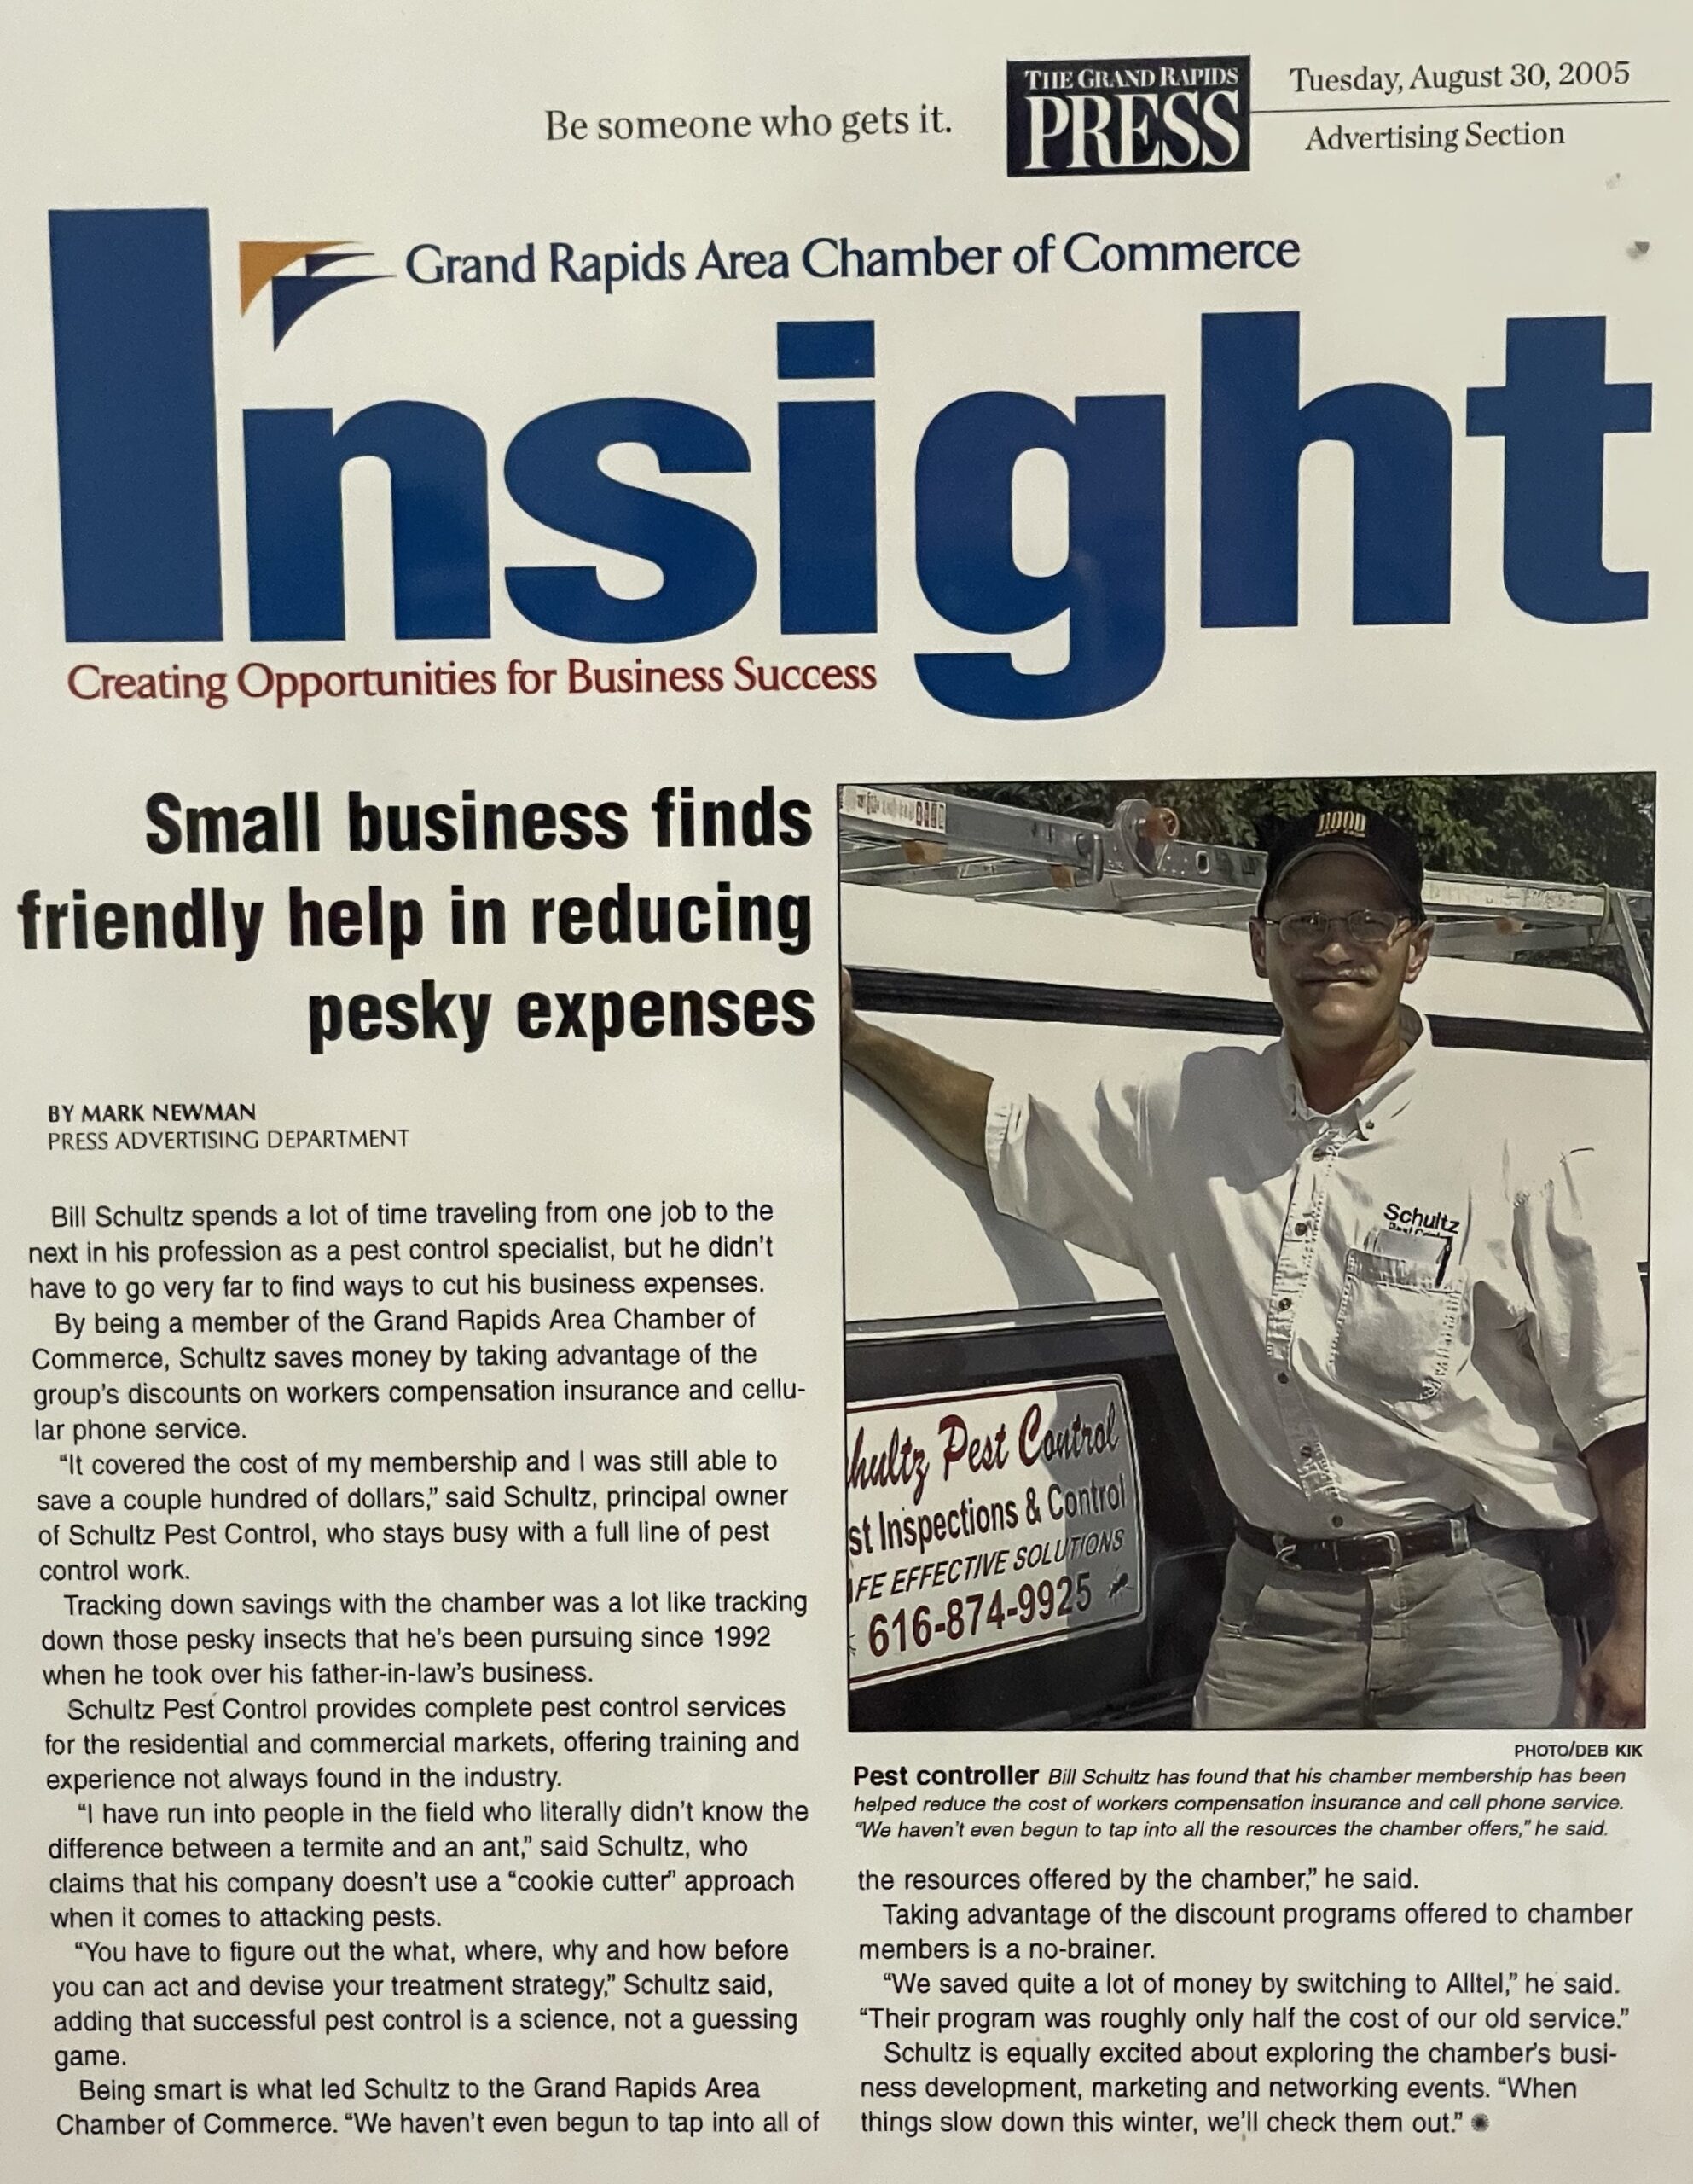 Bill Schultz standing next to his pest control vehicle, showcasing his success in reducing business expenses by taking advantage of Grand Rapids Area Chamber of Commerce resources in 2005.